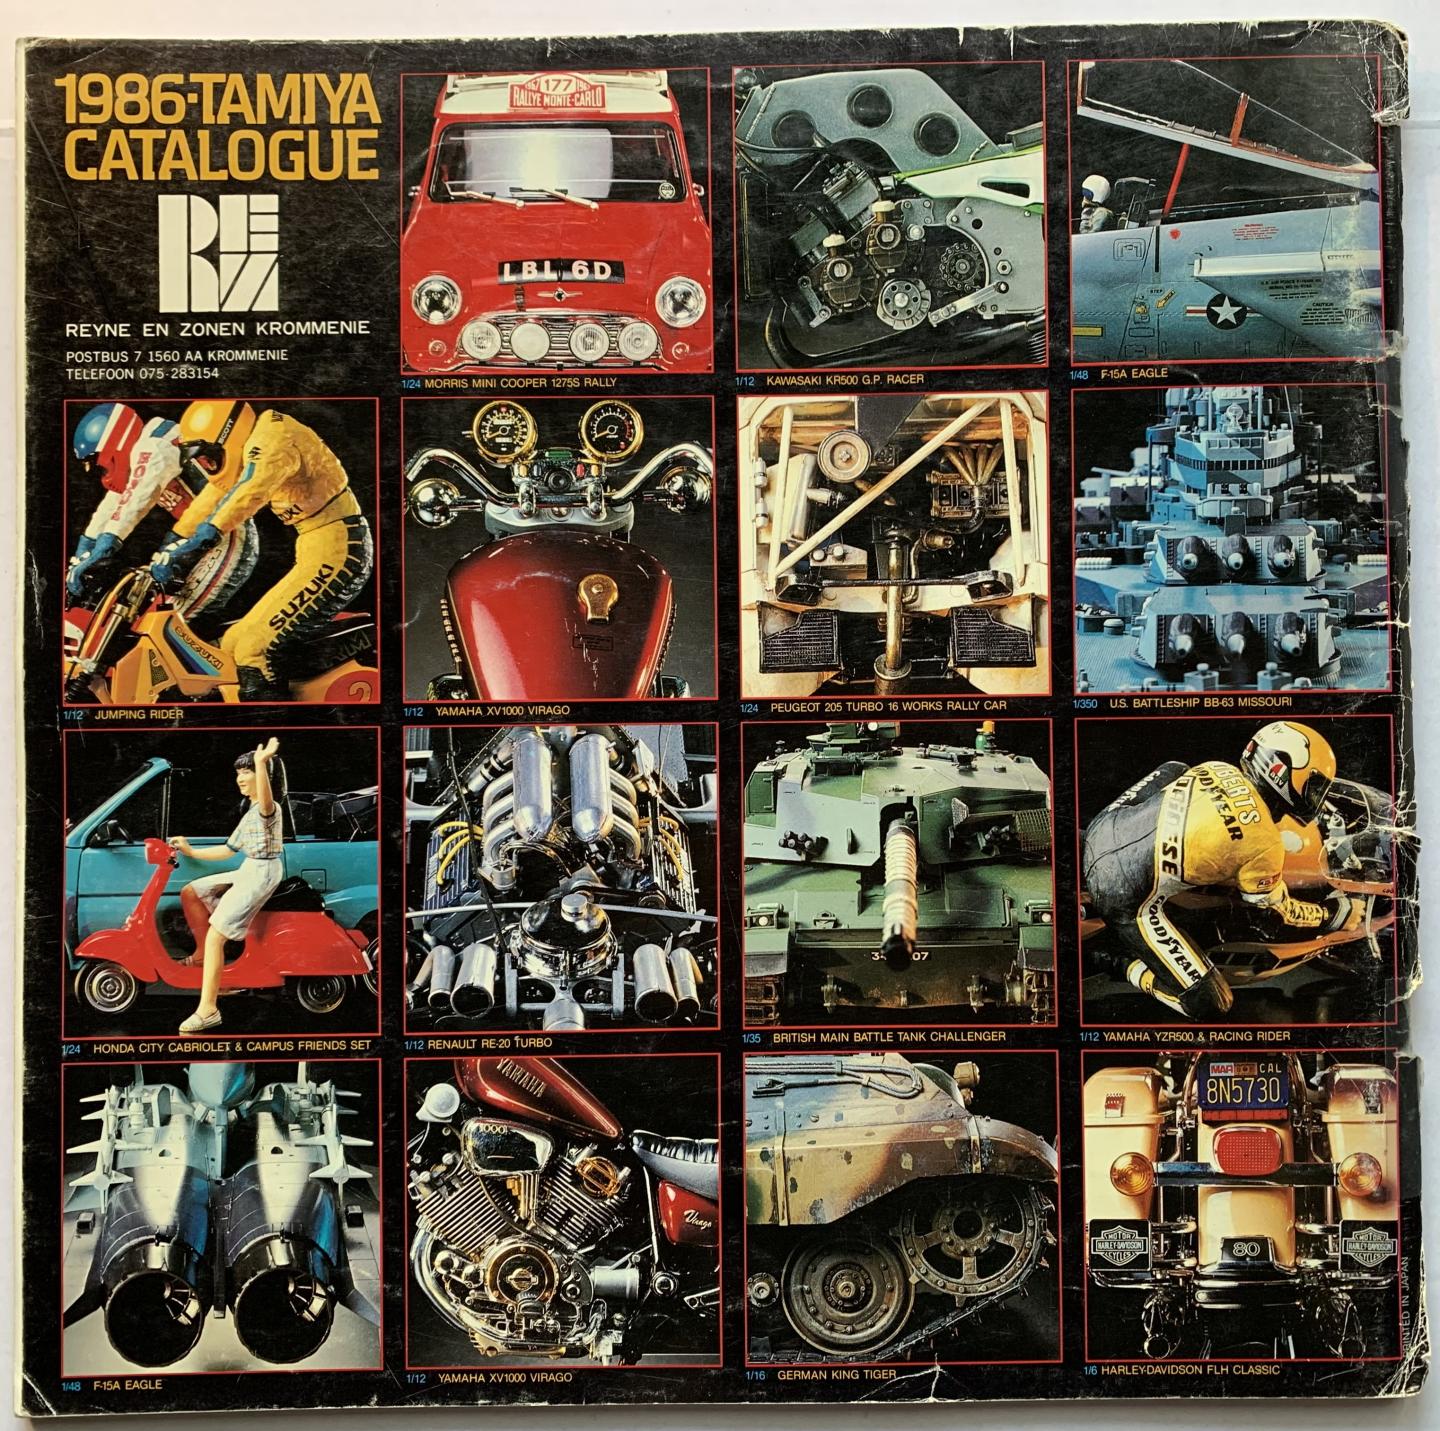 N.N. - 1986. Tamiya Catalogue. Showcase Collection precise scale model kits; armour, aircraft, motorcycles, ships, auto racing classics.